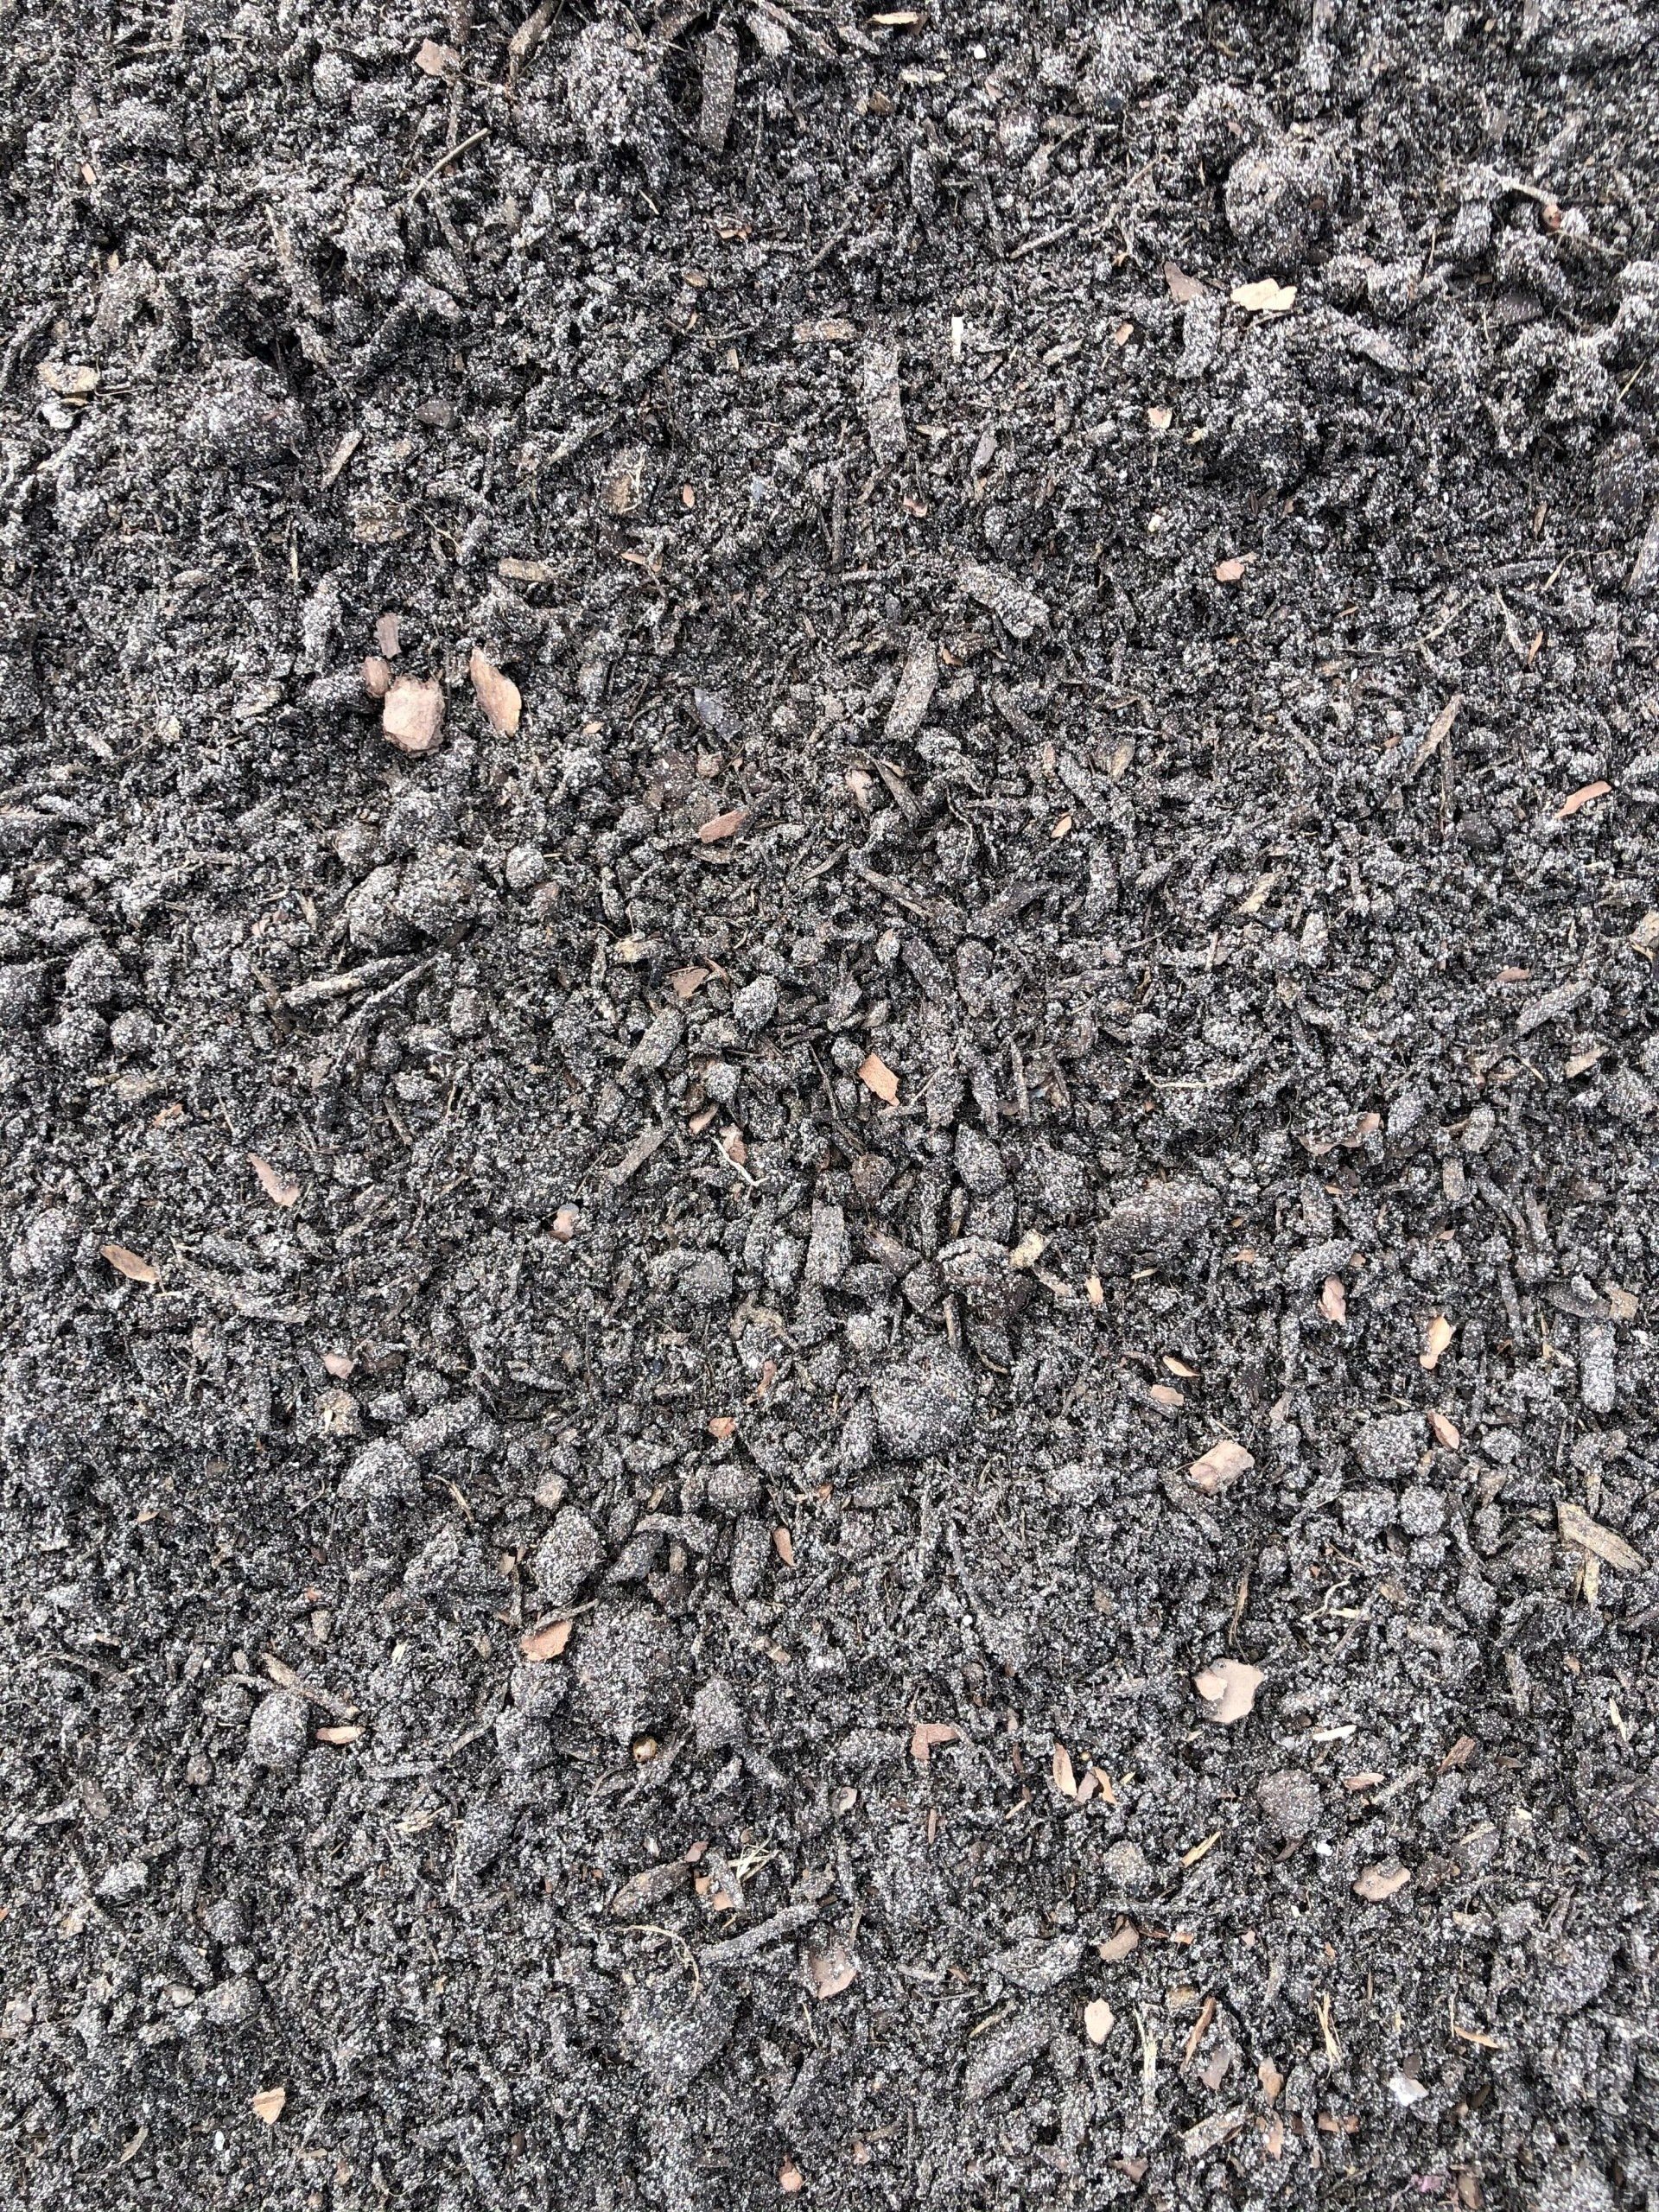 Topsoil - Sand and soil products in Florida